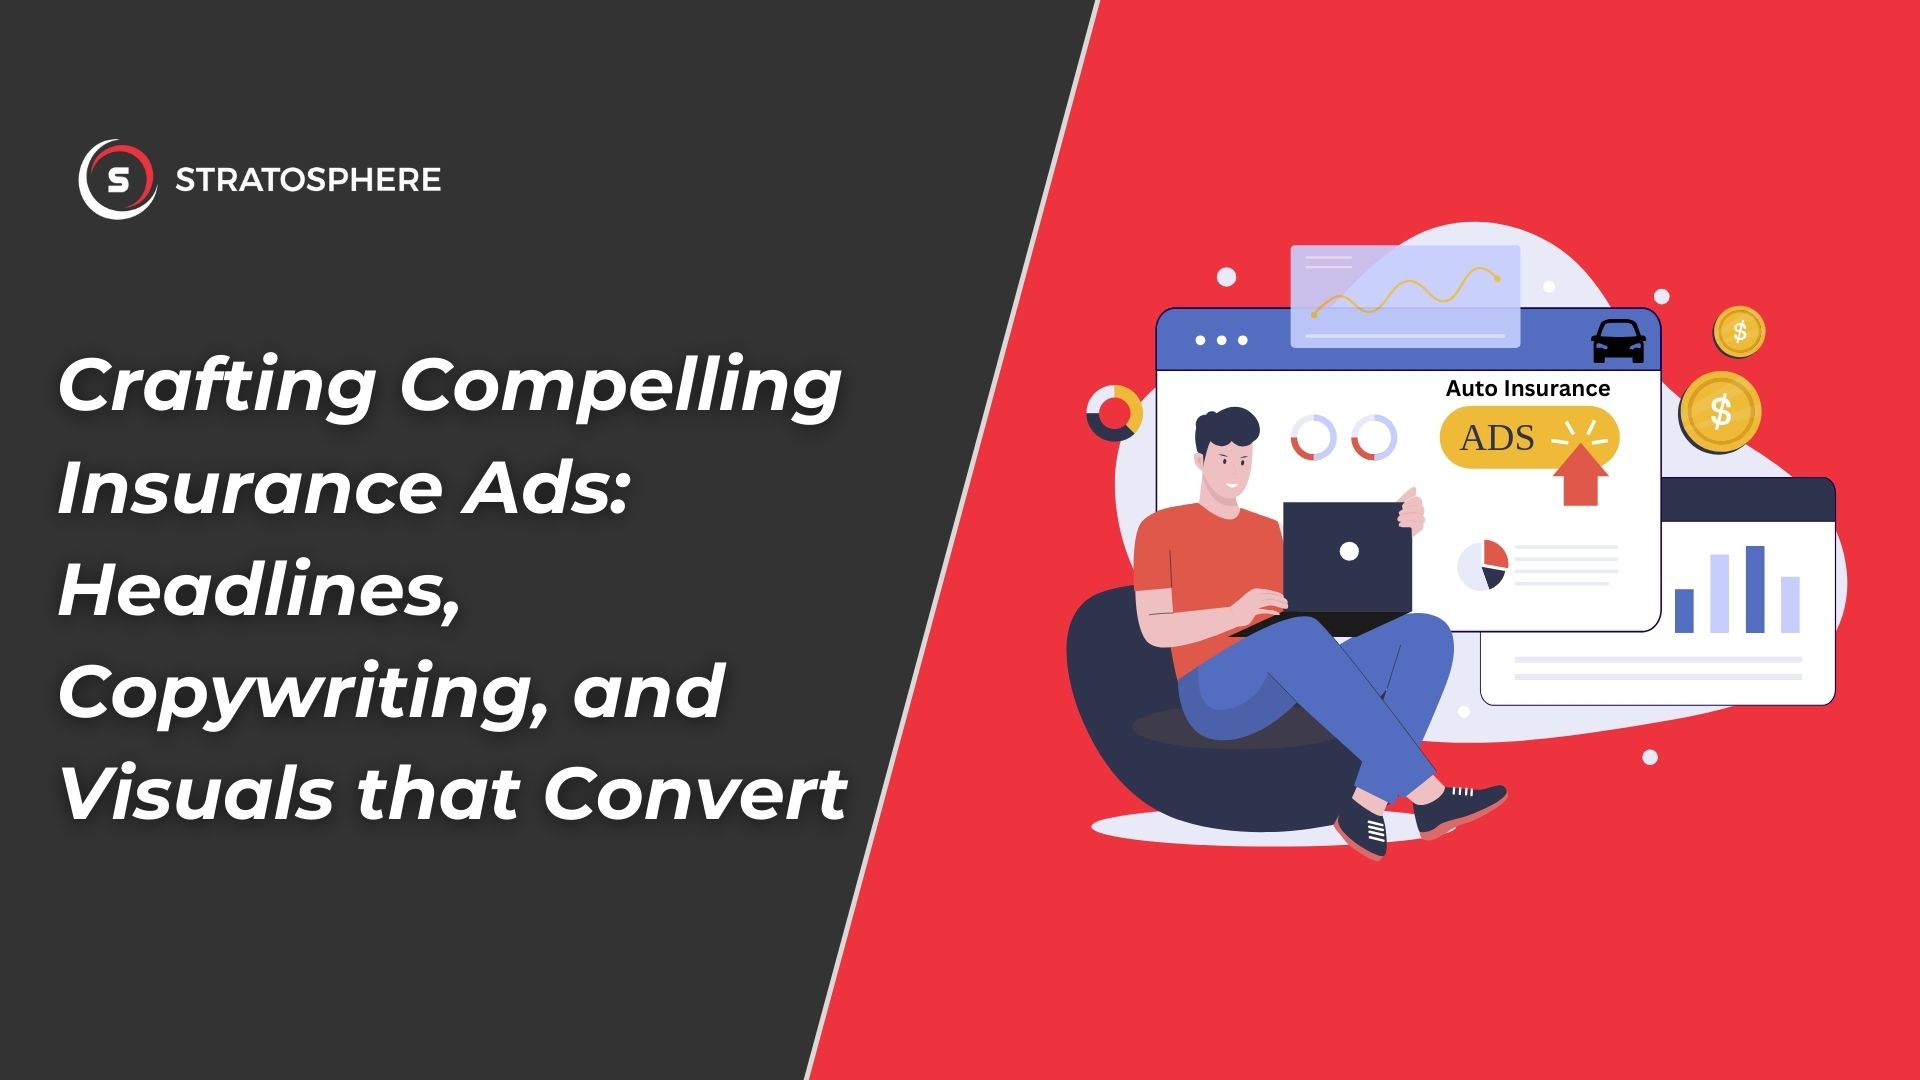 Crafting Compelling Insurance Ads: Headlines, Copywriting, and Visuals that Convert